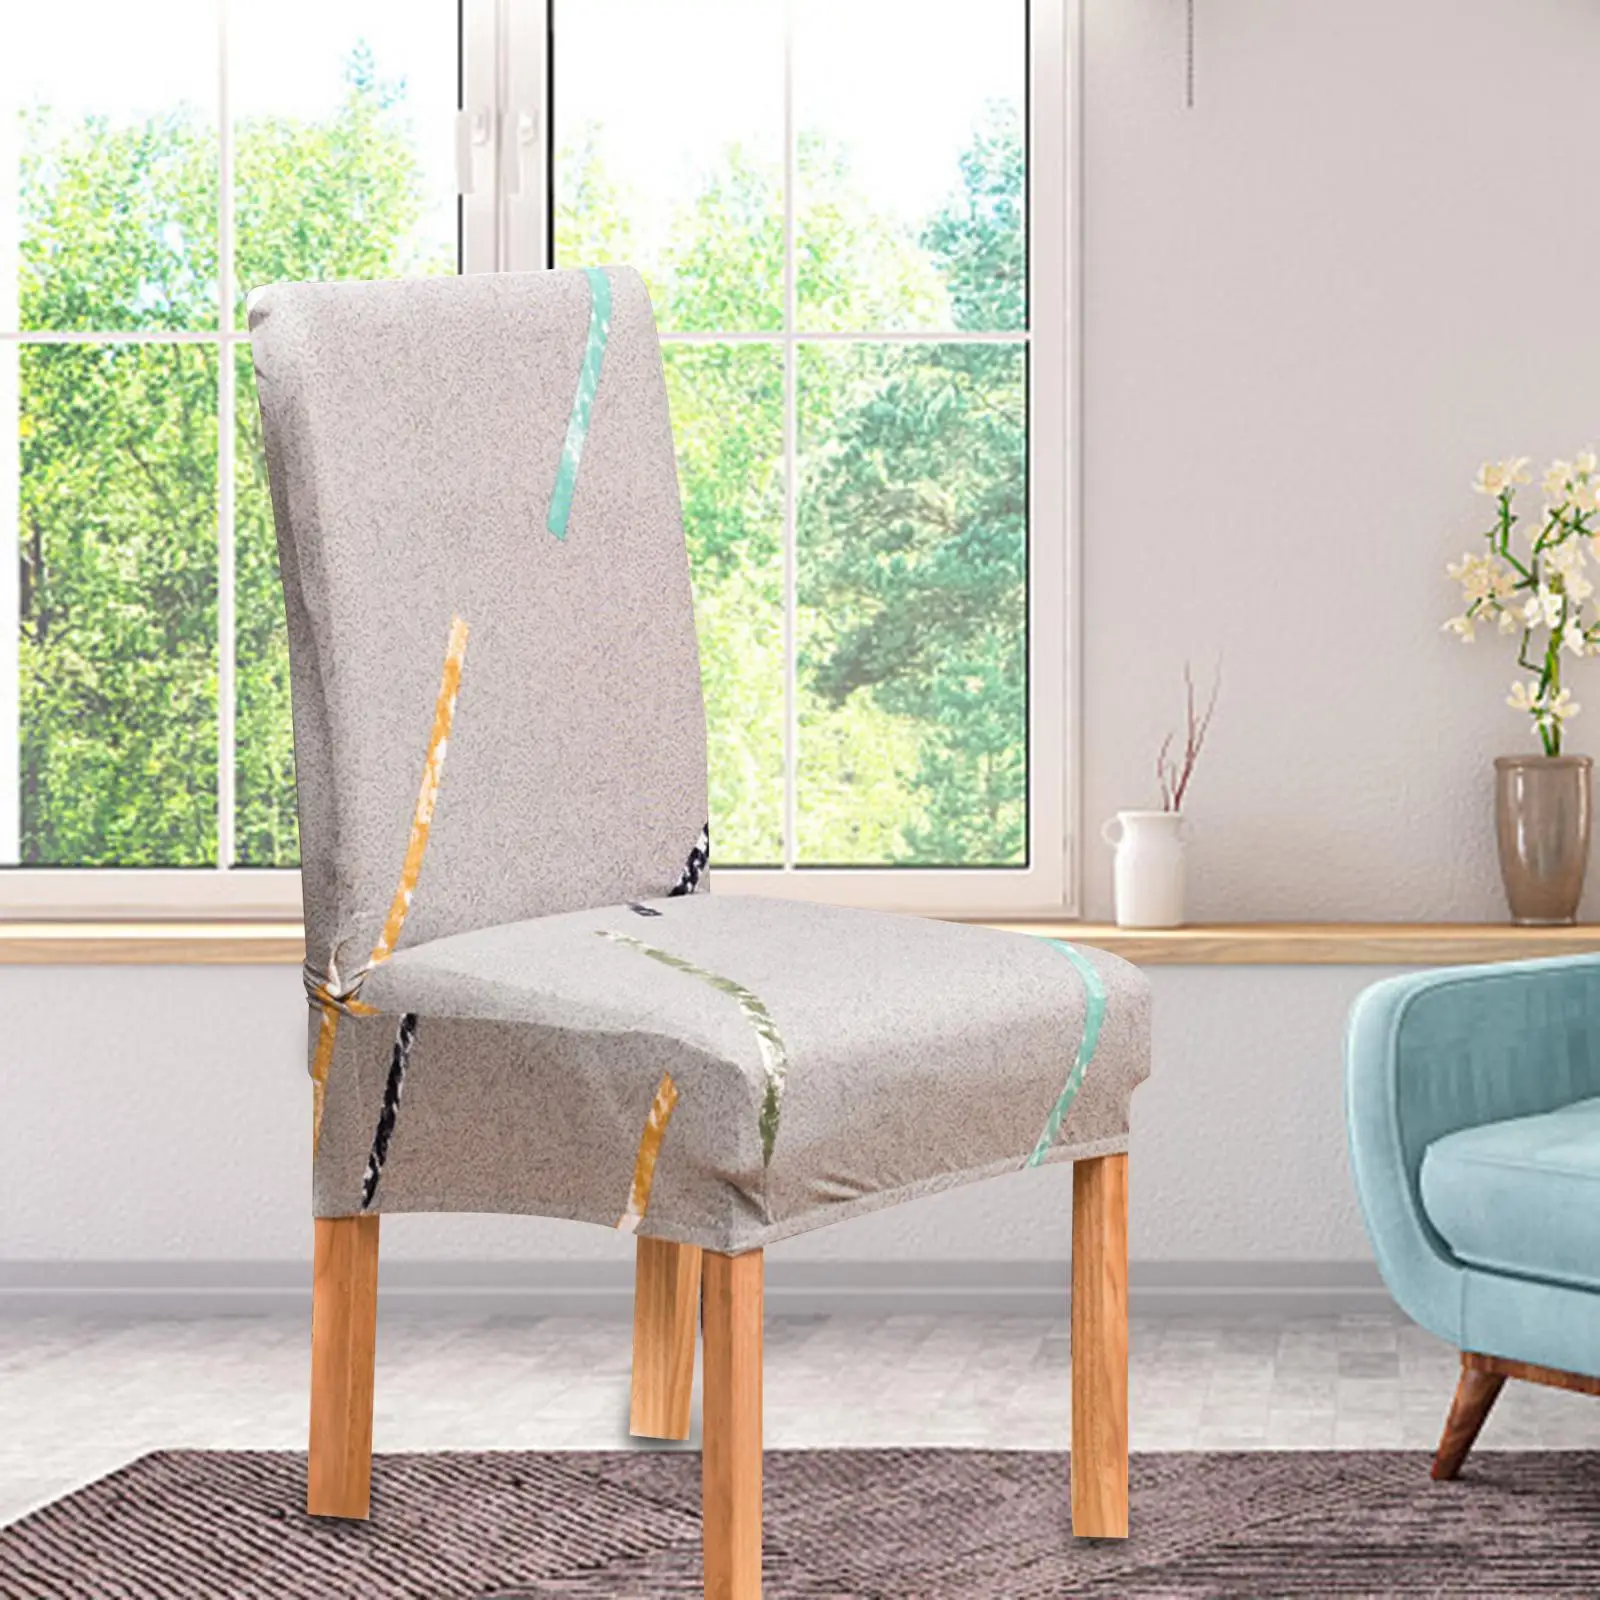 Armless Chair Slipcovers Seat Chair Covers Upholstered Stretch for Living Room Home Decoration Office Chair Cafe Kitchen